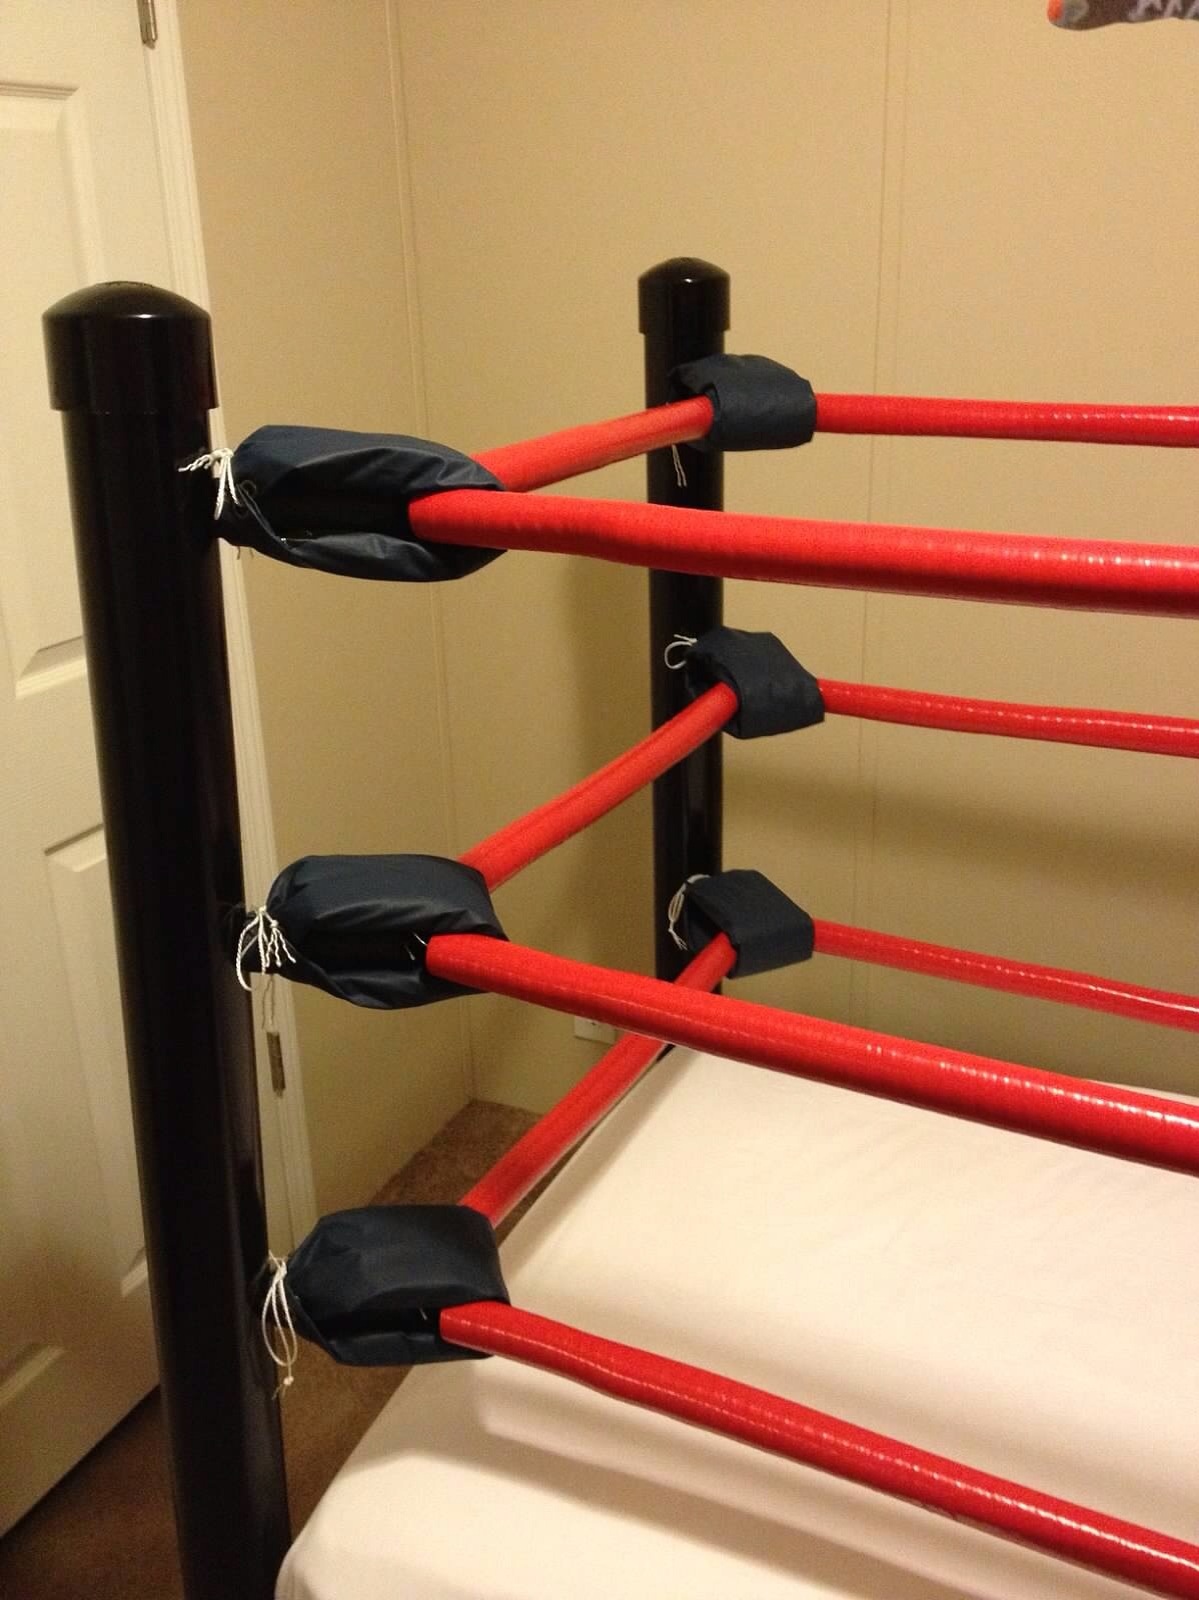 anna lisa gonzales recommends wwe wrestling ring beds pic